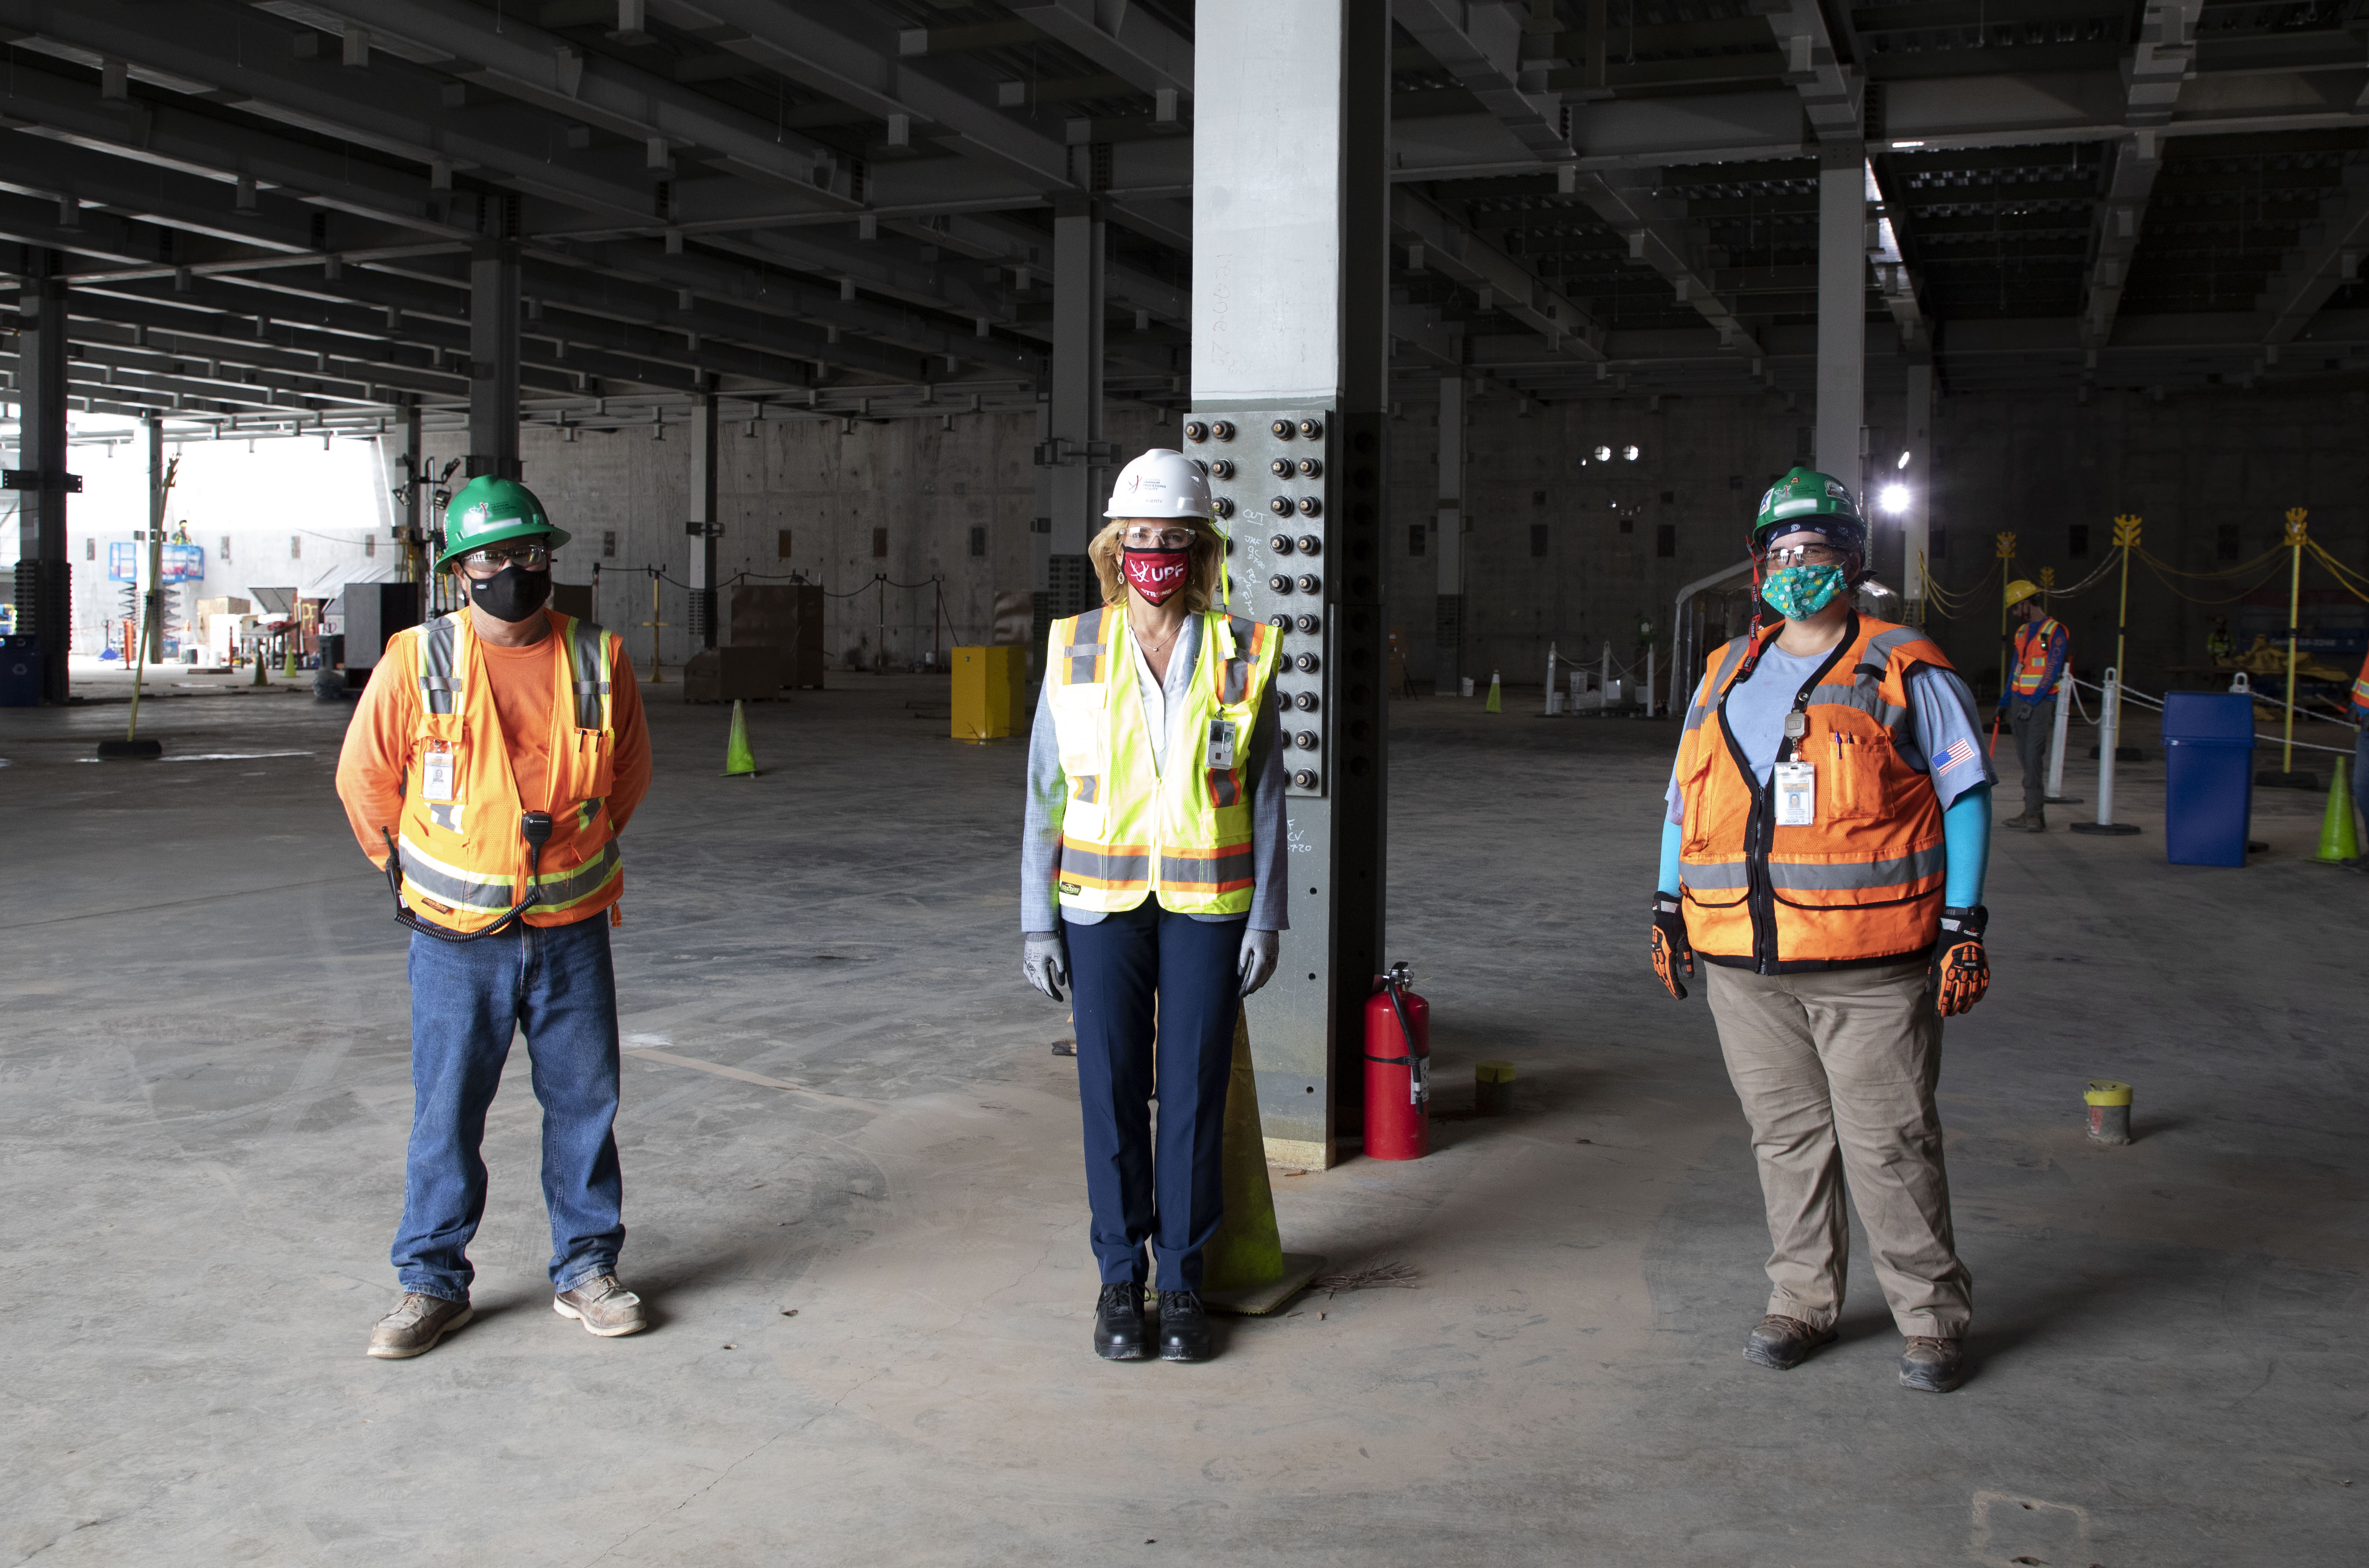 NNSA Administrator Lisa E. Gordon-Hagerty (center) with UPF Iron Workers in the Main Process Building